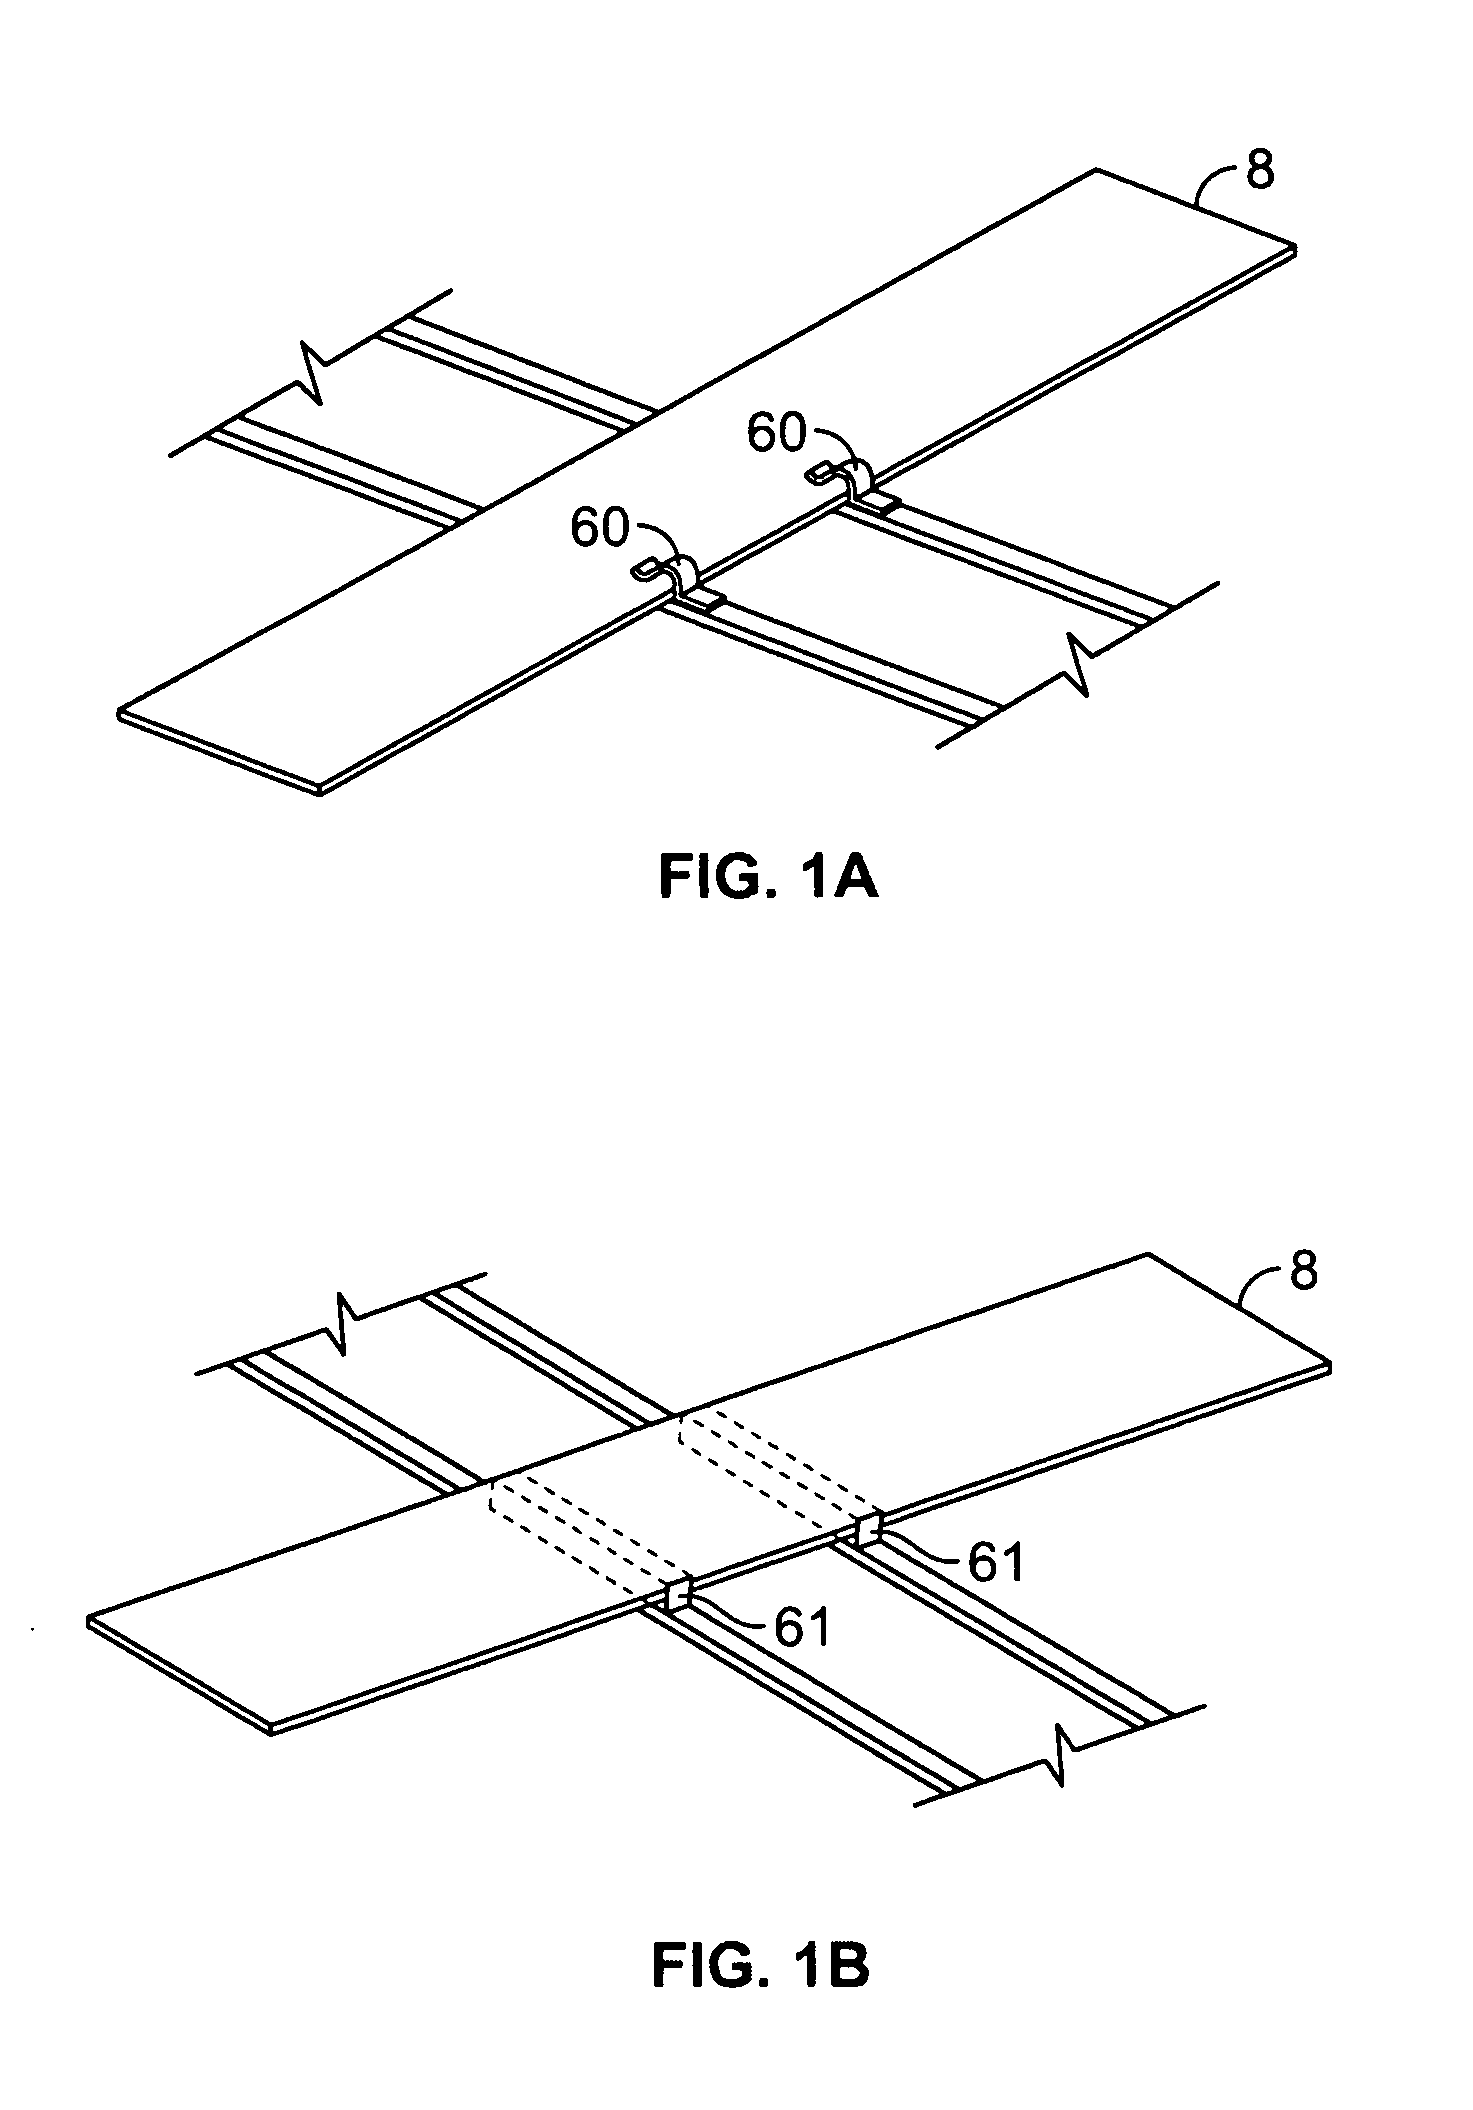 Signature velocity reduction device and method